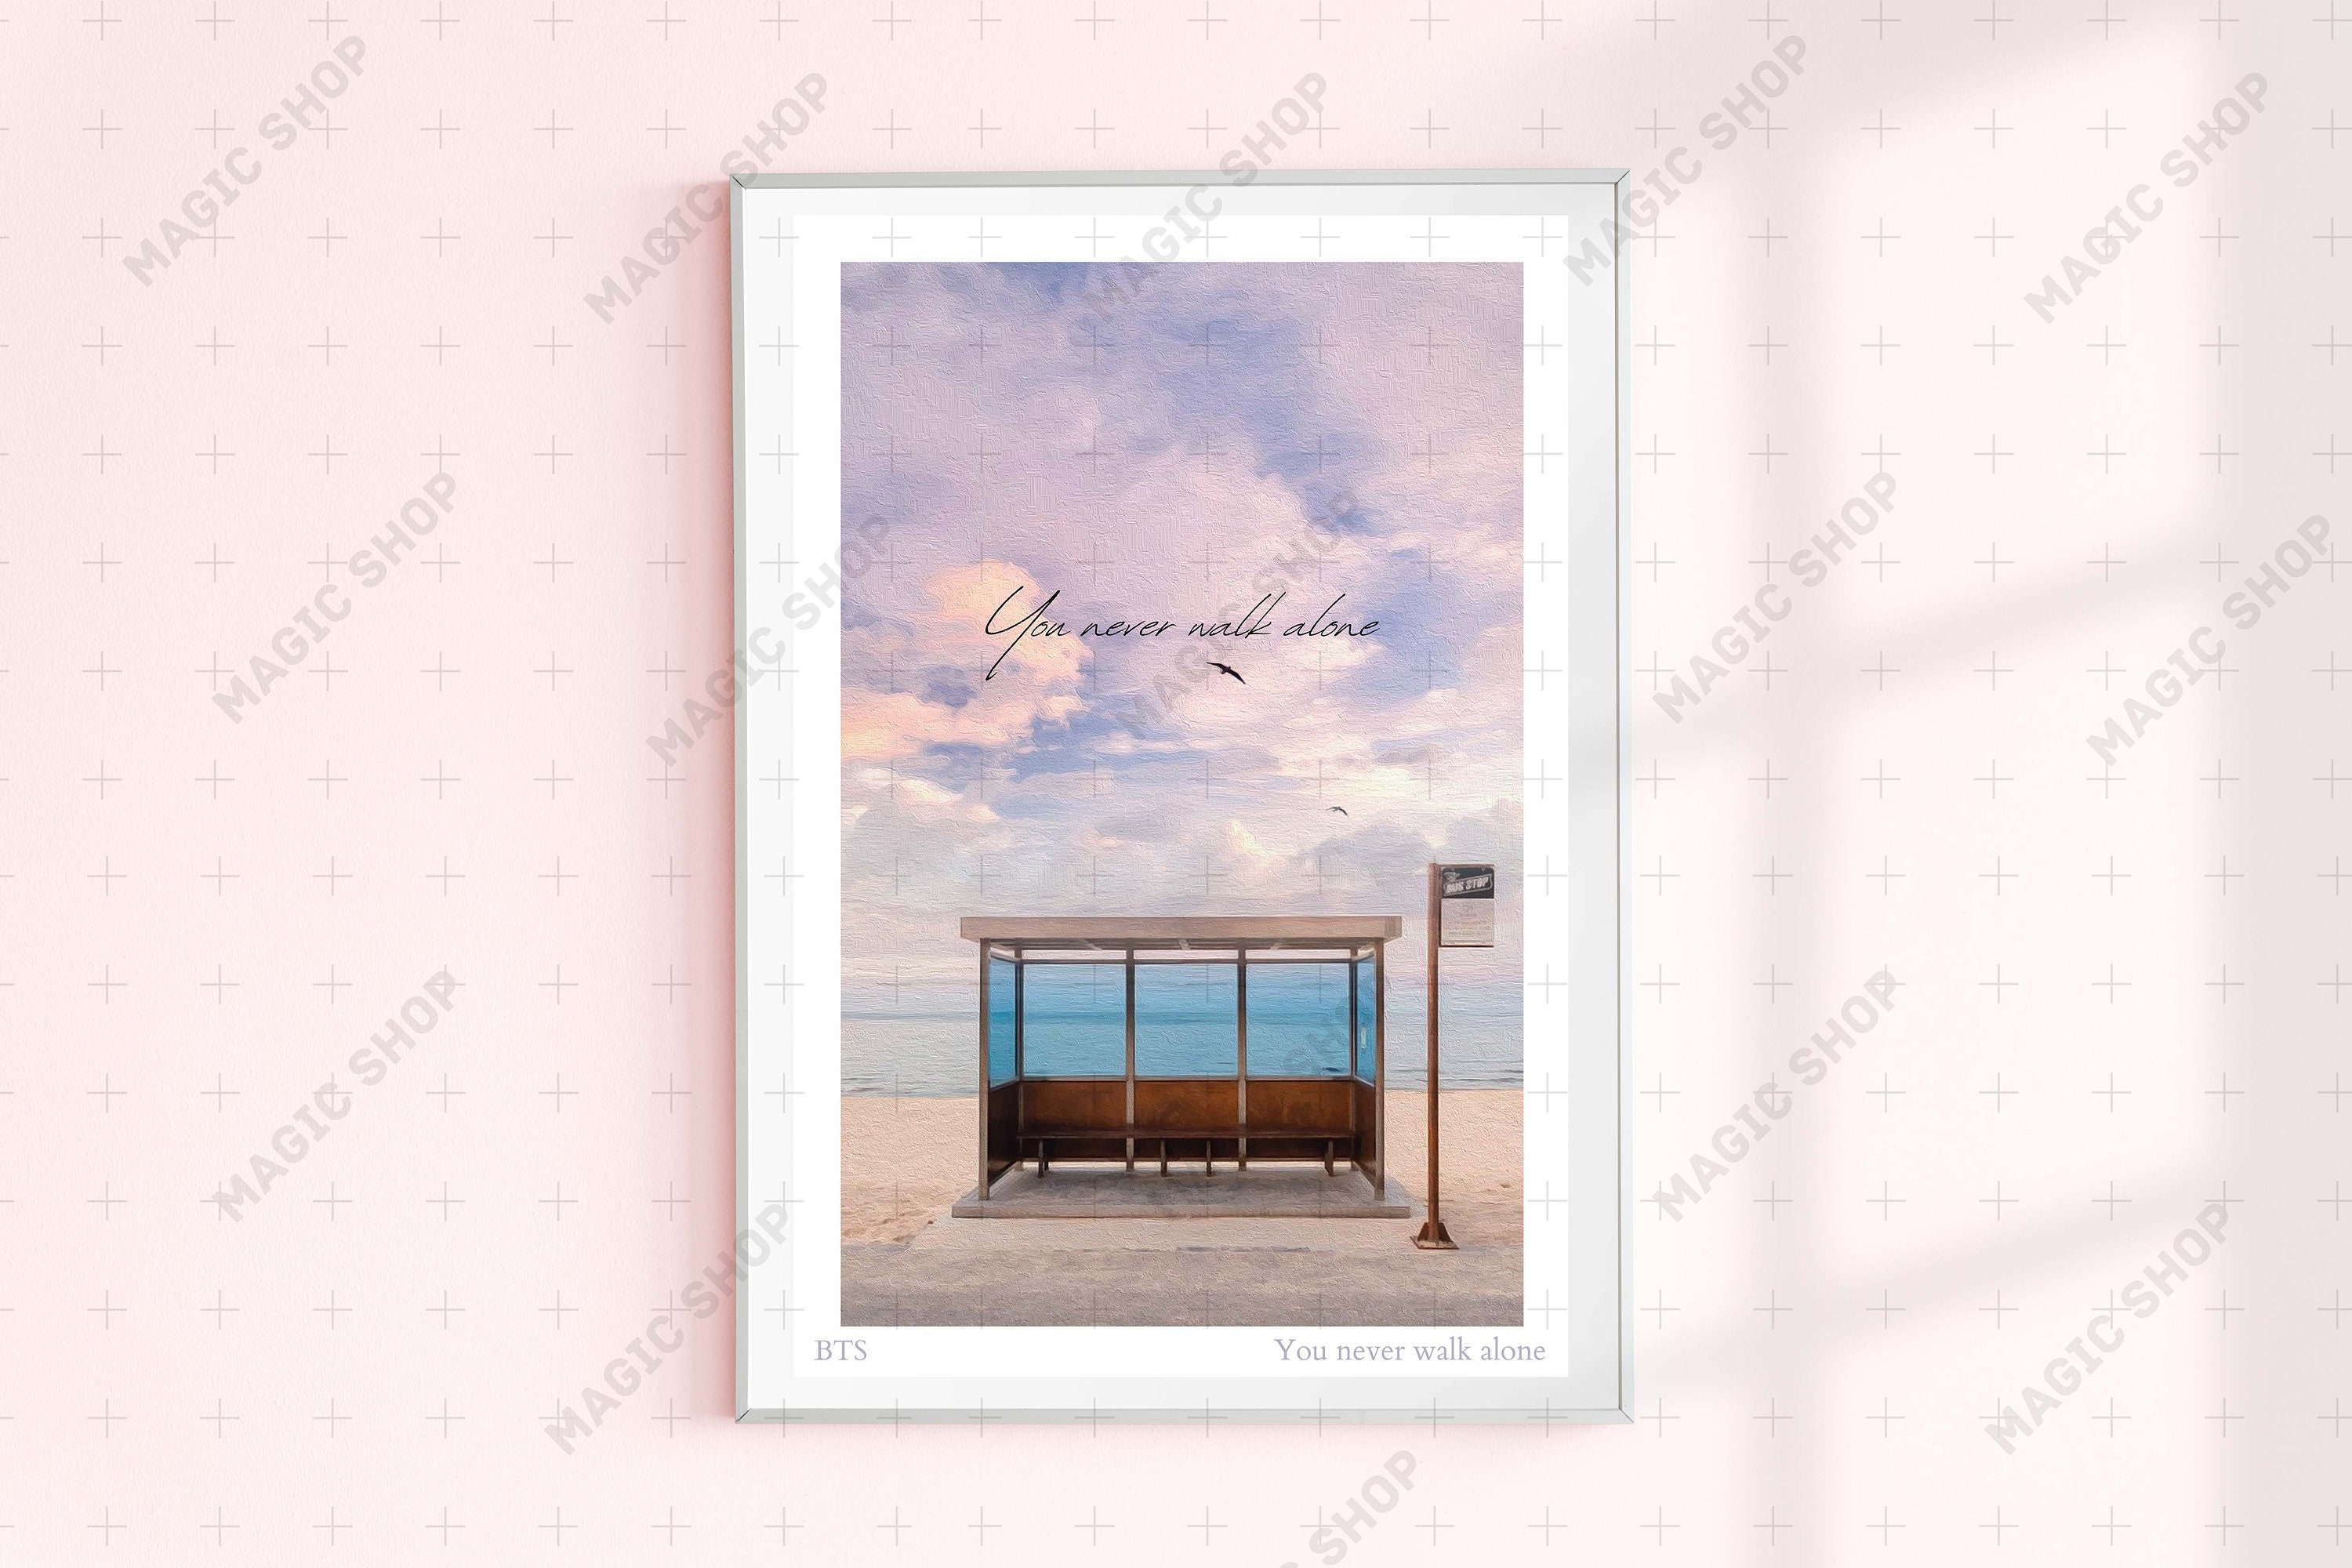  SSQIAN BTS Merchandise BTS Album Cover Acrylic Puzzle Standing  Display, Home, Desk, Bedroom Decor, Gift for Friends, Sisters, and  Colleague on Christmas/Birthday : Home & Kitchen